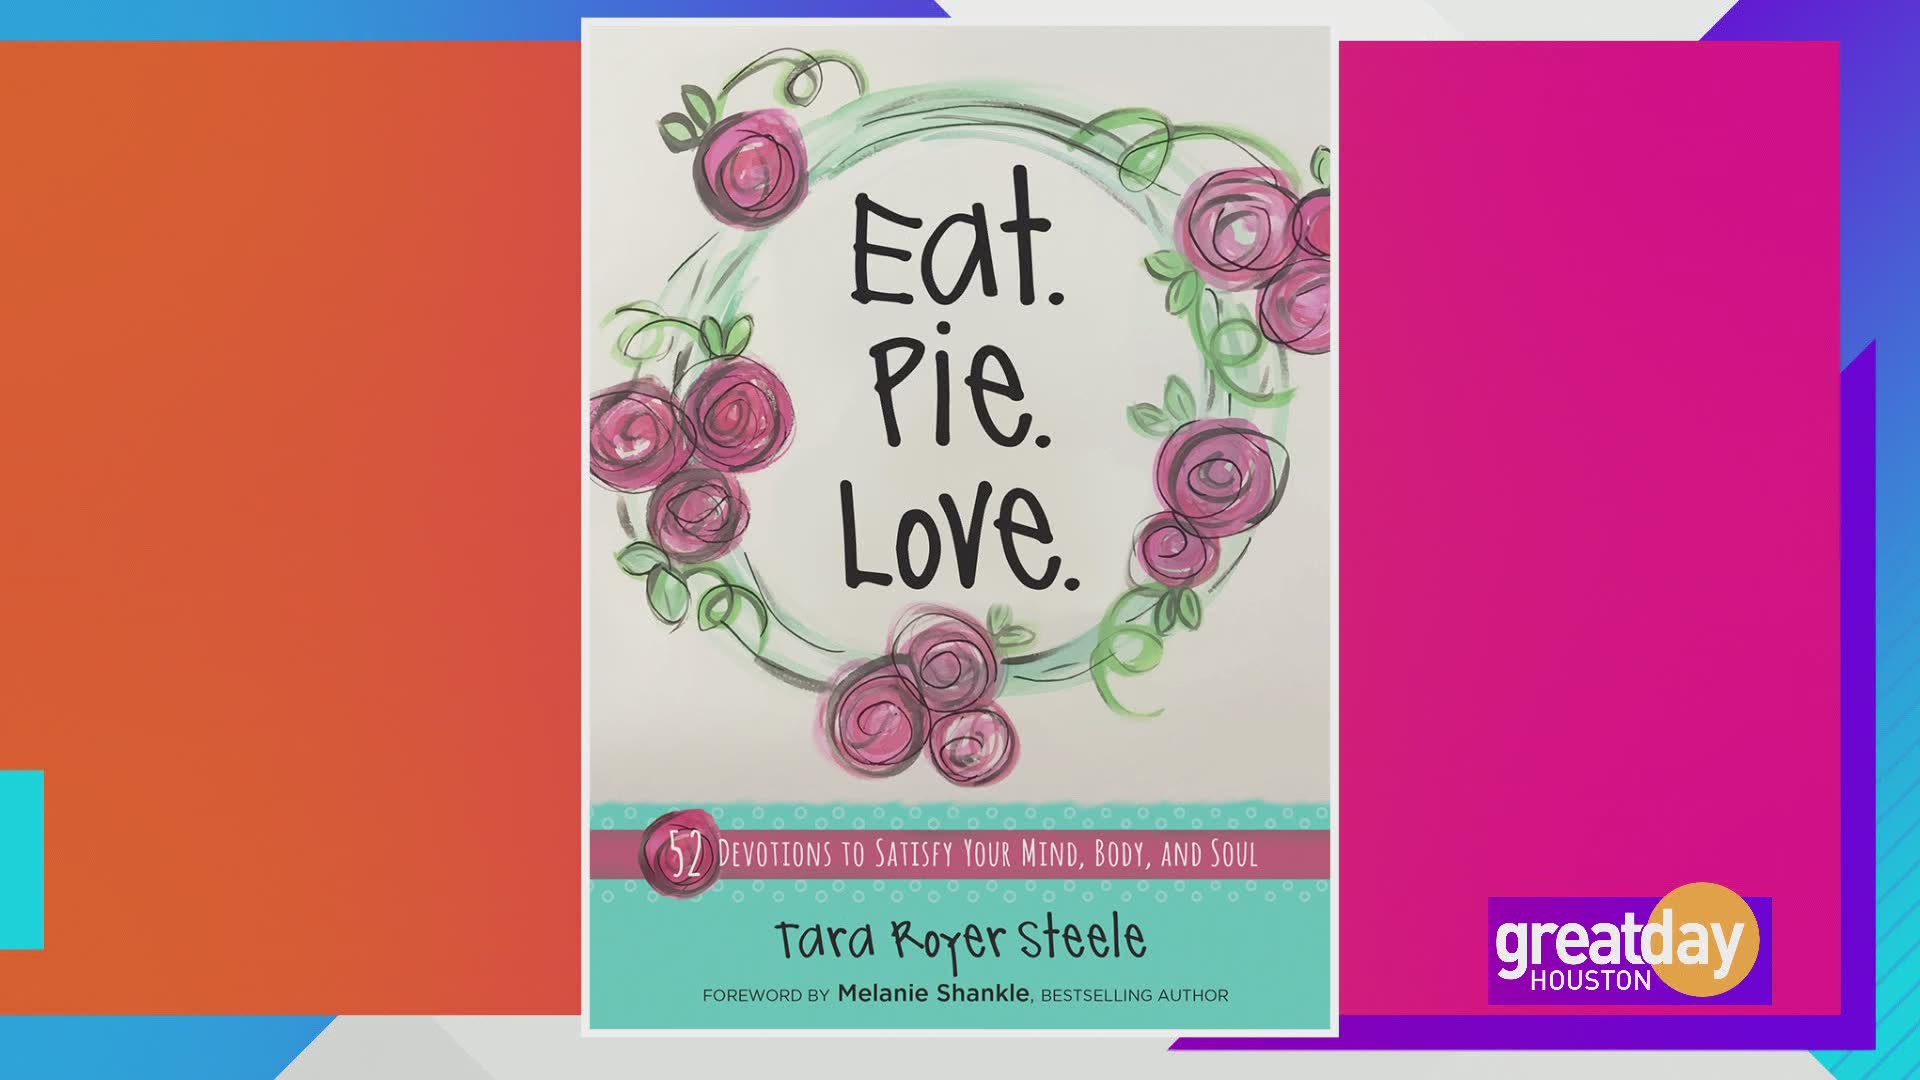 Tara Royer Steele shares a slice of inspiration in new book "Eat.Pie.Love."